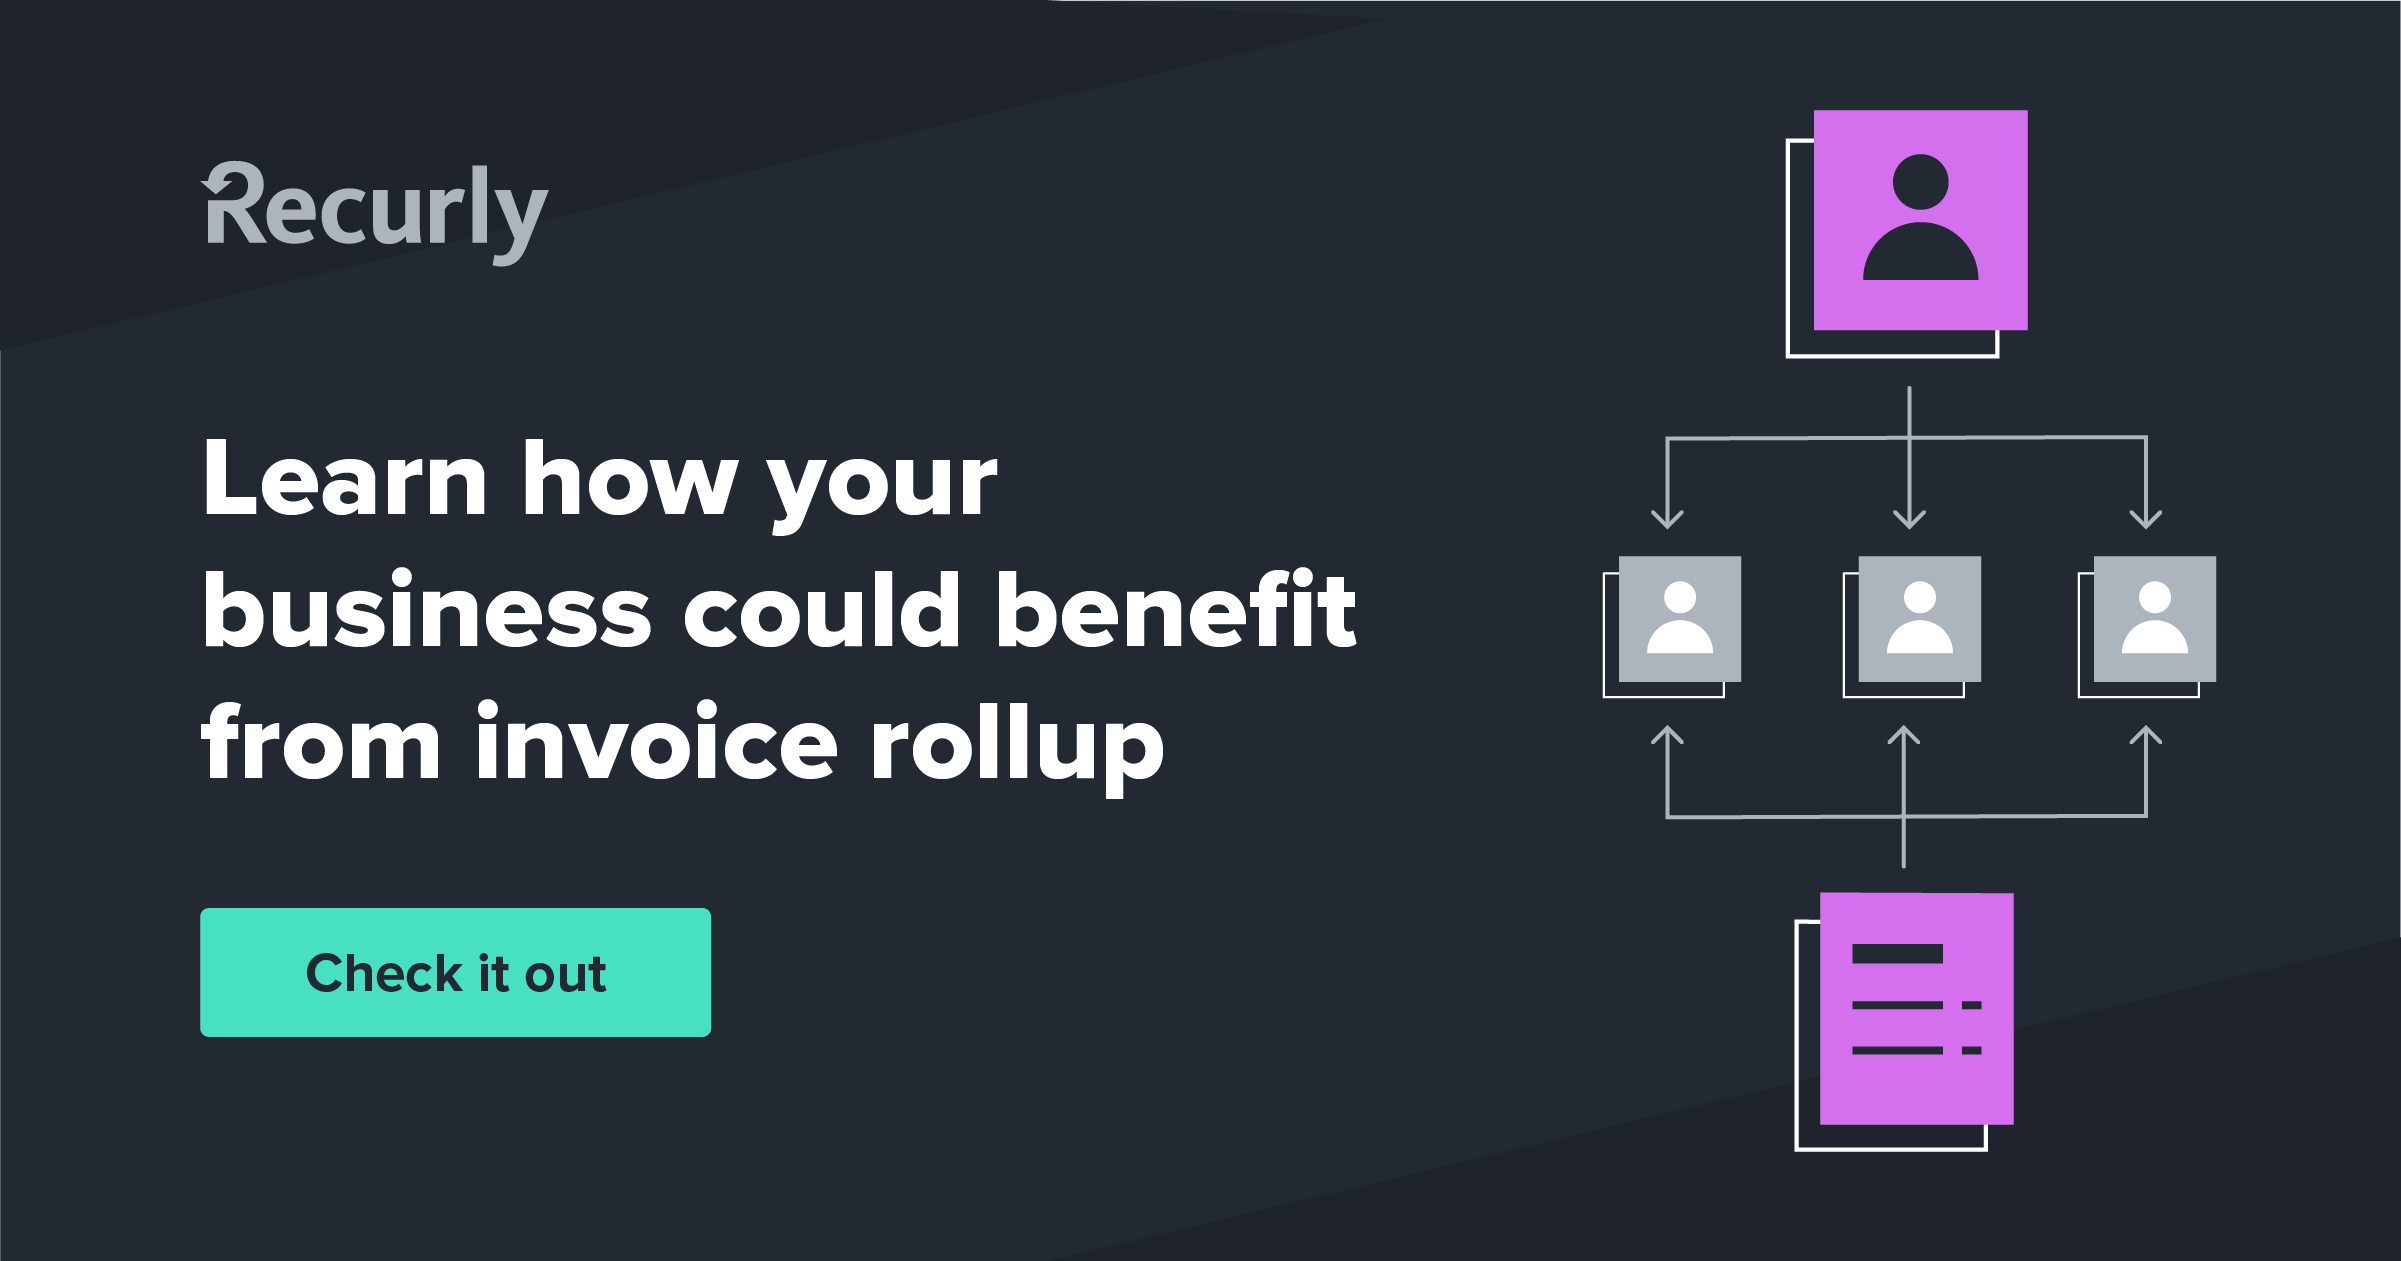 Learn how your business could benefit from invoice rollup